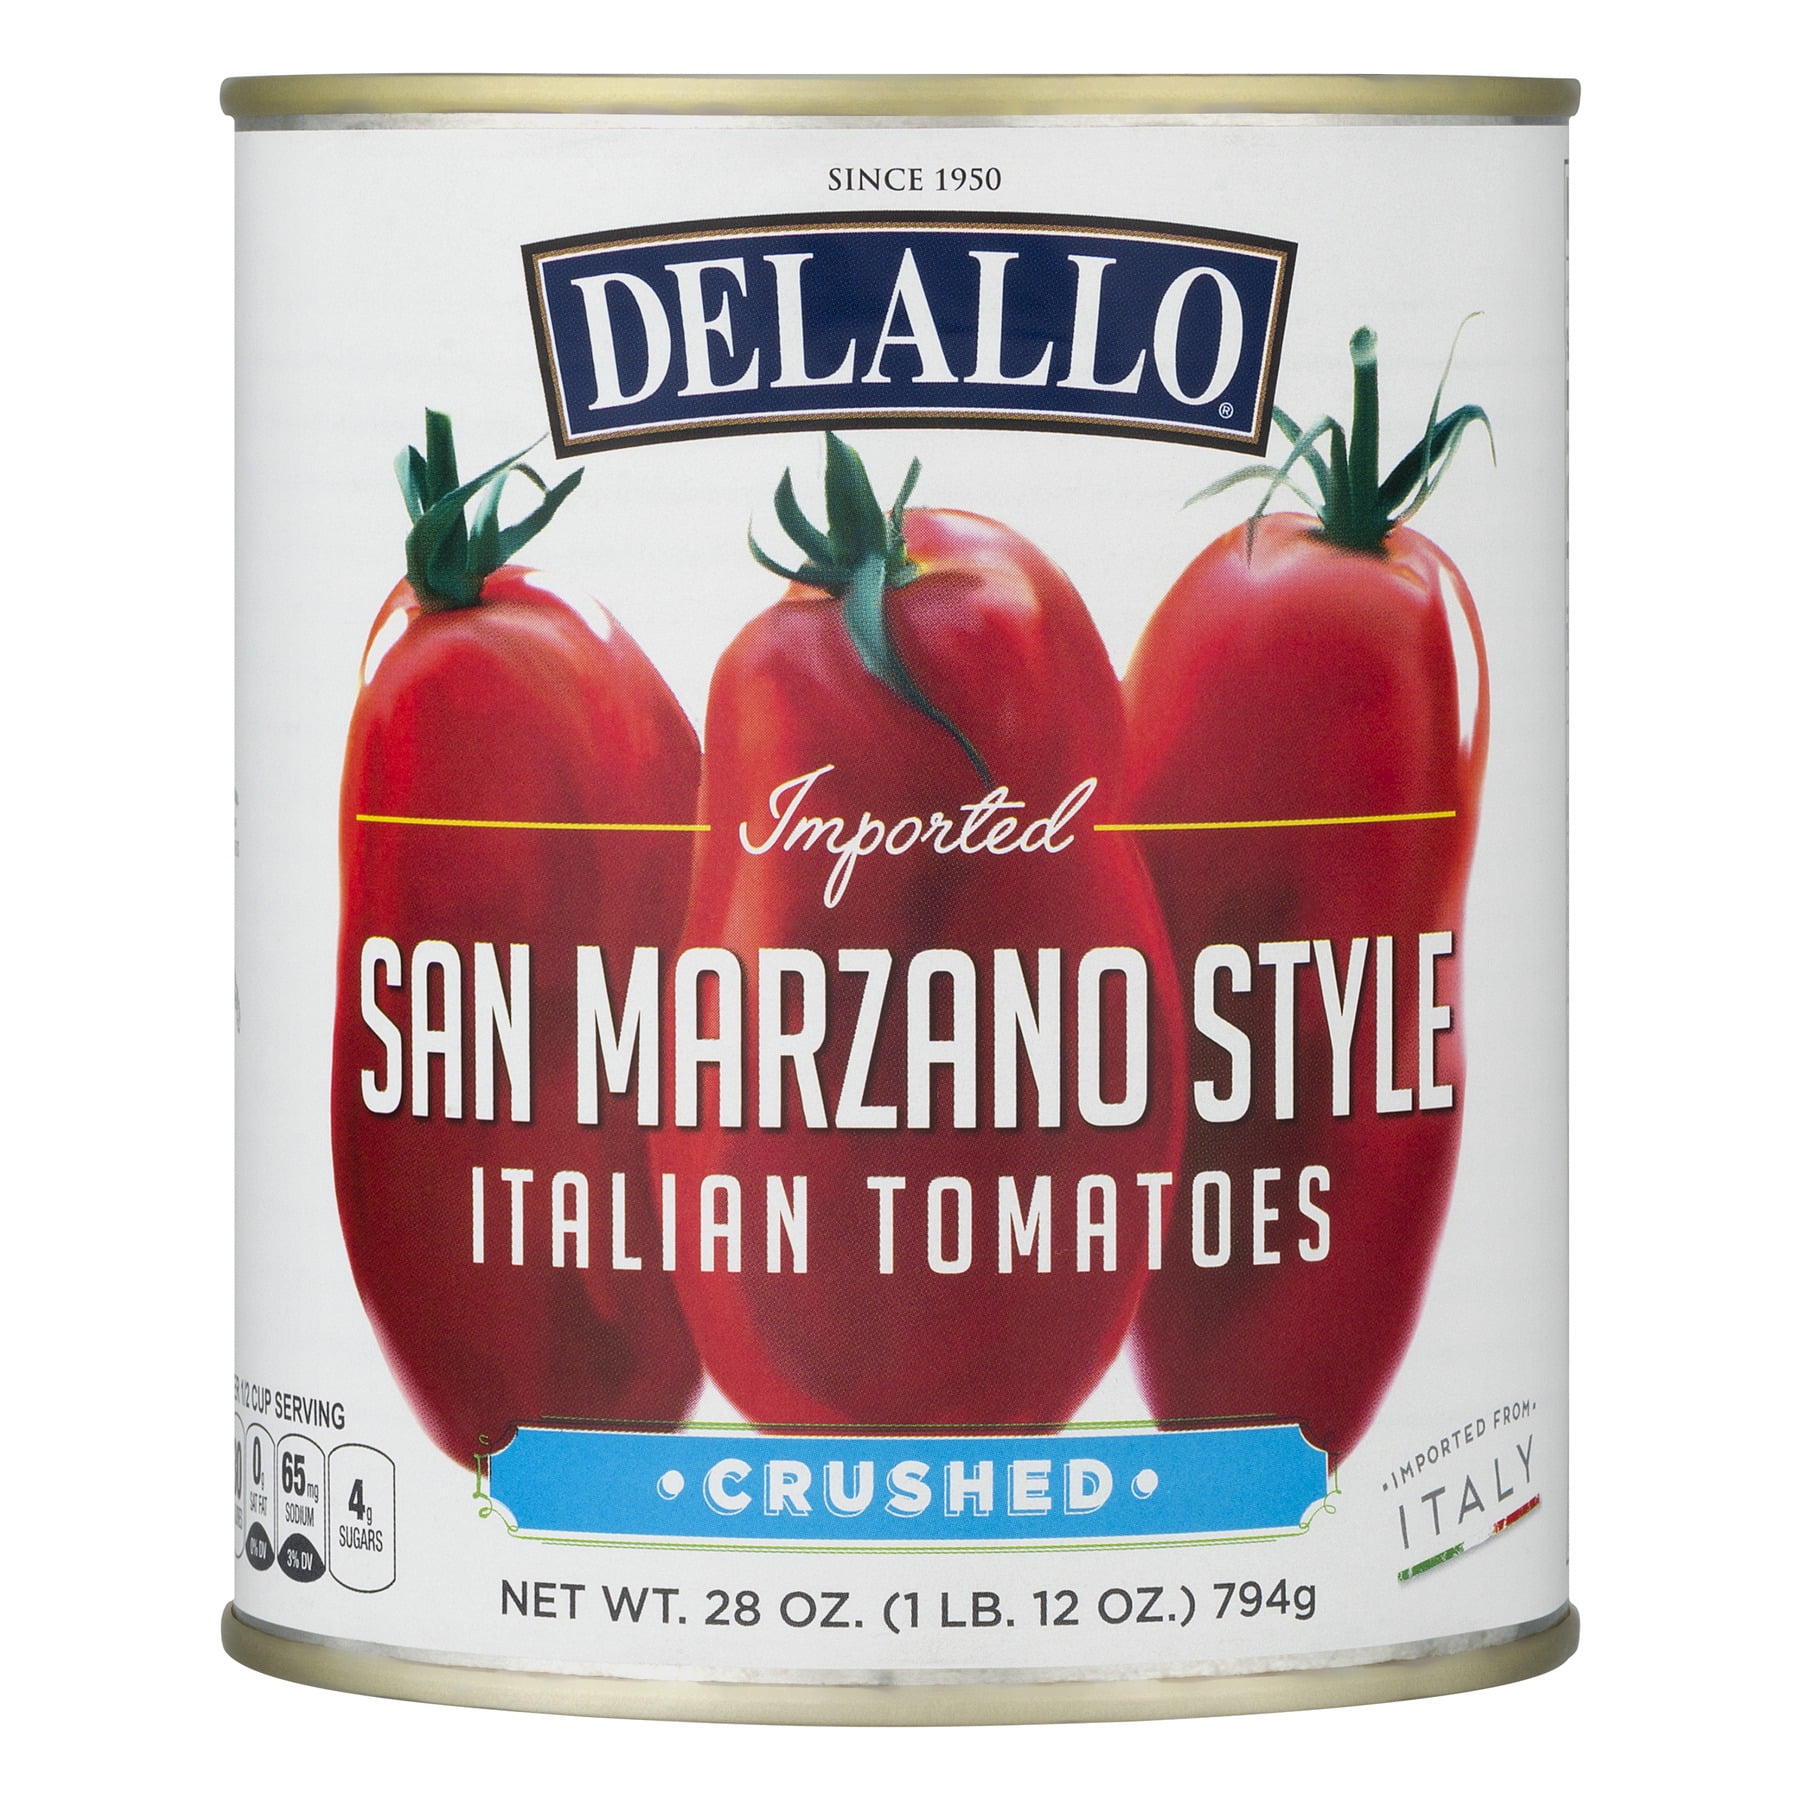 Delallo Imported San Marzano Style Italian Crushed Tomatoes, 28oz can